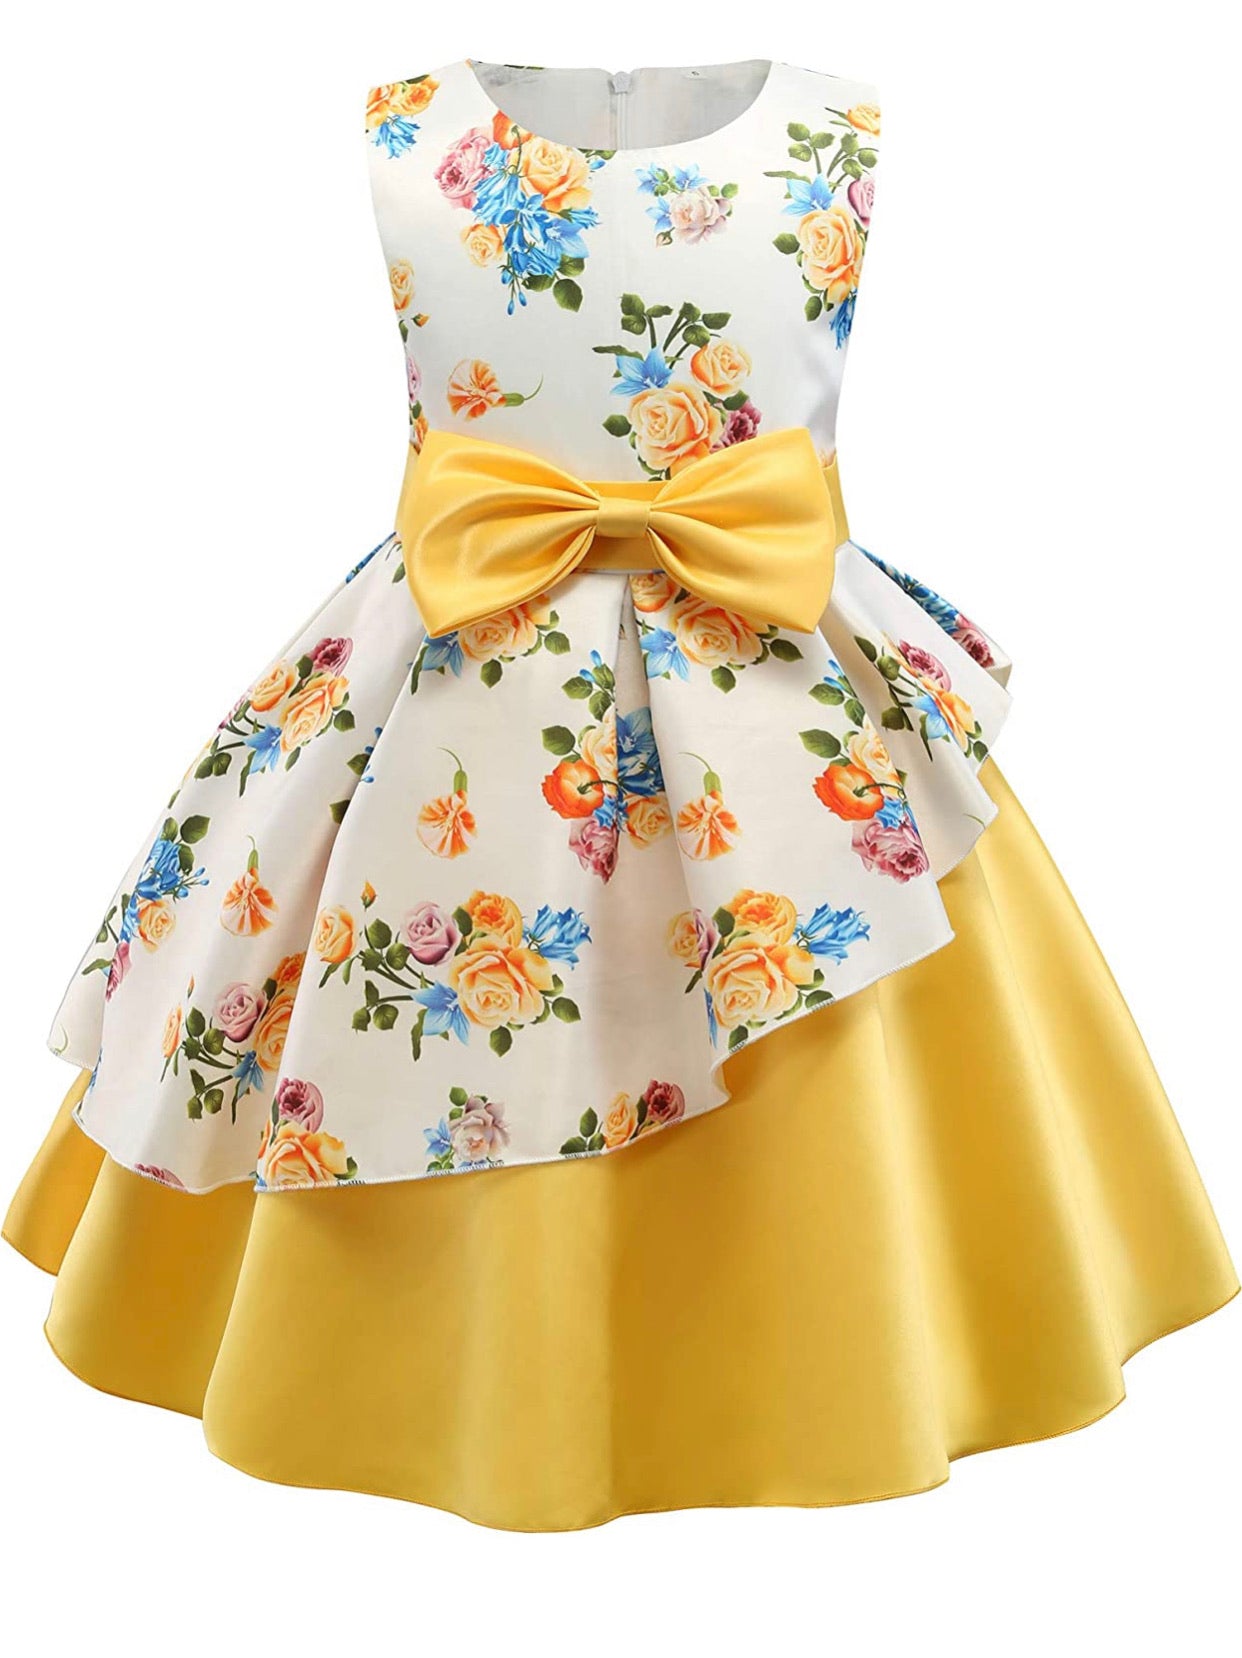 Little Girl’s Formal Floral Print Dress, Sizes 2T - 9 years (Yellow)